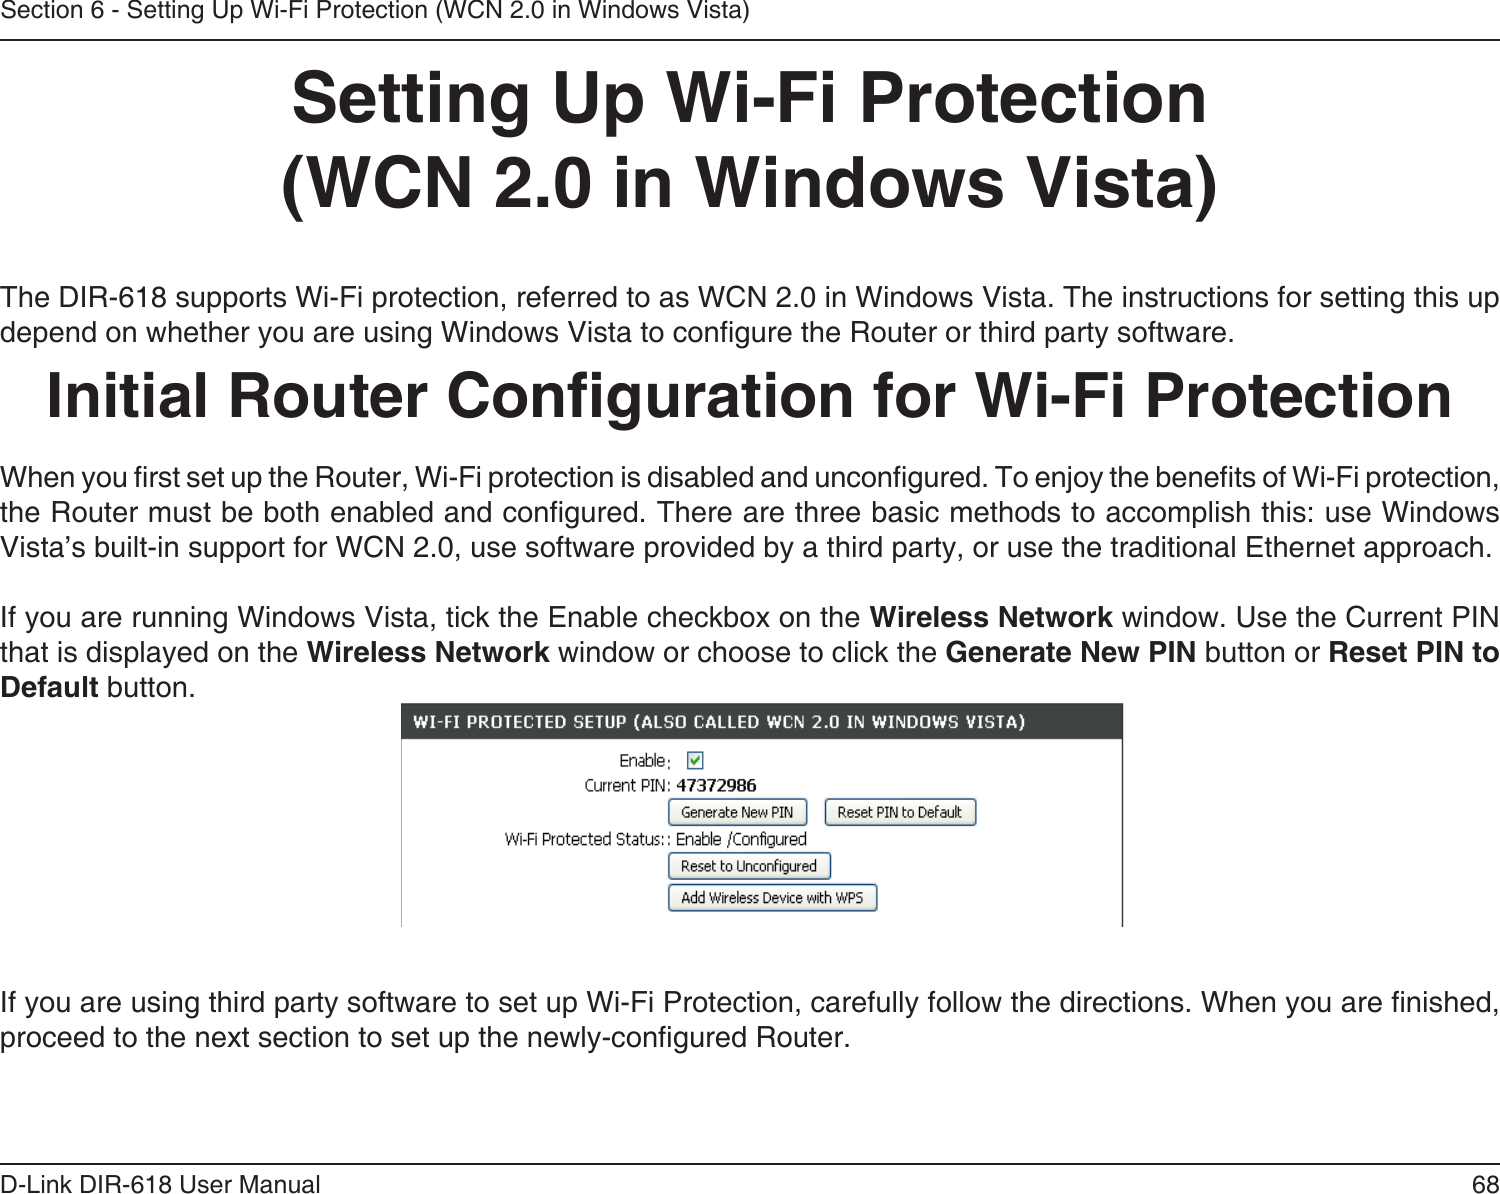 68D-Link DIR-618 User ManualSection 6 - Setting Up Wi-Fi Protection (WCN 2.0 in Windows Vista)Setting Up Wi-Fi Protection(WCN 2.0 in Windows Vista)The DIR-618 supports Wi-Fi protection, referred to as WCN 2.0 in Windows Vista. The instructions for setting this up depend on whether you are using Windows Vista to congure the Router or third party software.        Initial Router Conguration for Wi-Fi ProtectionWhen you rst set up the Router, Wi-Fi protection is disabled and uncongured. To enjoy the benets of Wi-Fi protection, the Router must be both enabled and congured. There are three basic methods to accomplish this: use Windows Vista’s built-in support for WCN 2.0, use software provided by a third party, or use the traditional Ethernet approach. If you are running Windows Vista, tick the Enable checkbox on the Wireless Network window. Use the Current PINthat is displayed on the Wireless Network window or choose to click the Generate New PIN button or Reset PIN to Default button. If you are using third party software to set up Wi-Fi Protection, carefully follow the directions. When you are nished, proceed to the next section to set up the newly-congured Router.